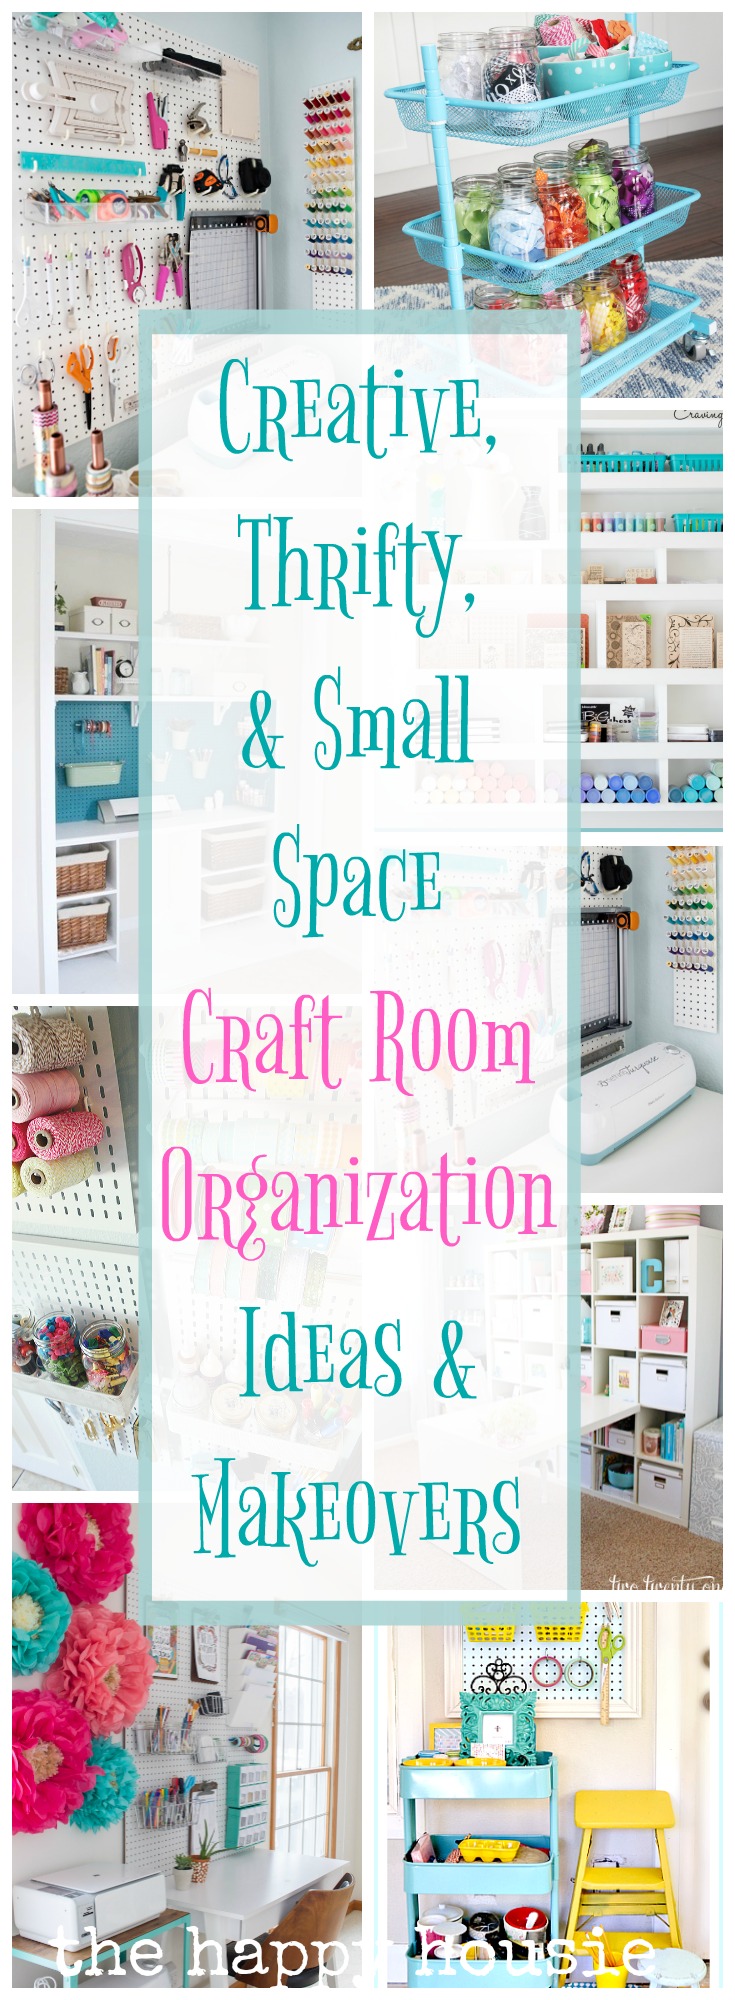 https://www.thehappyhousie.com/wp-content/uploads/2017/03/Super-creative-thrifty-and-small-space-craft-room-organization-ideas-and-makeovers-to-help-you-get-your-workspace-totally-organized-no-matter-how-big-or-small-it-is.jpg